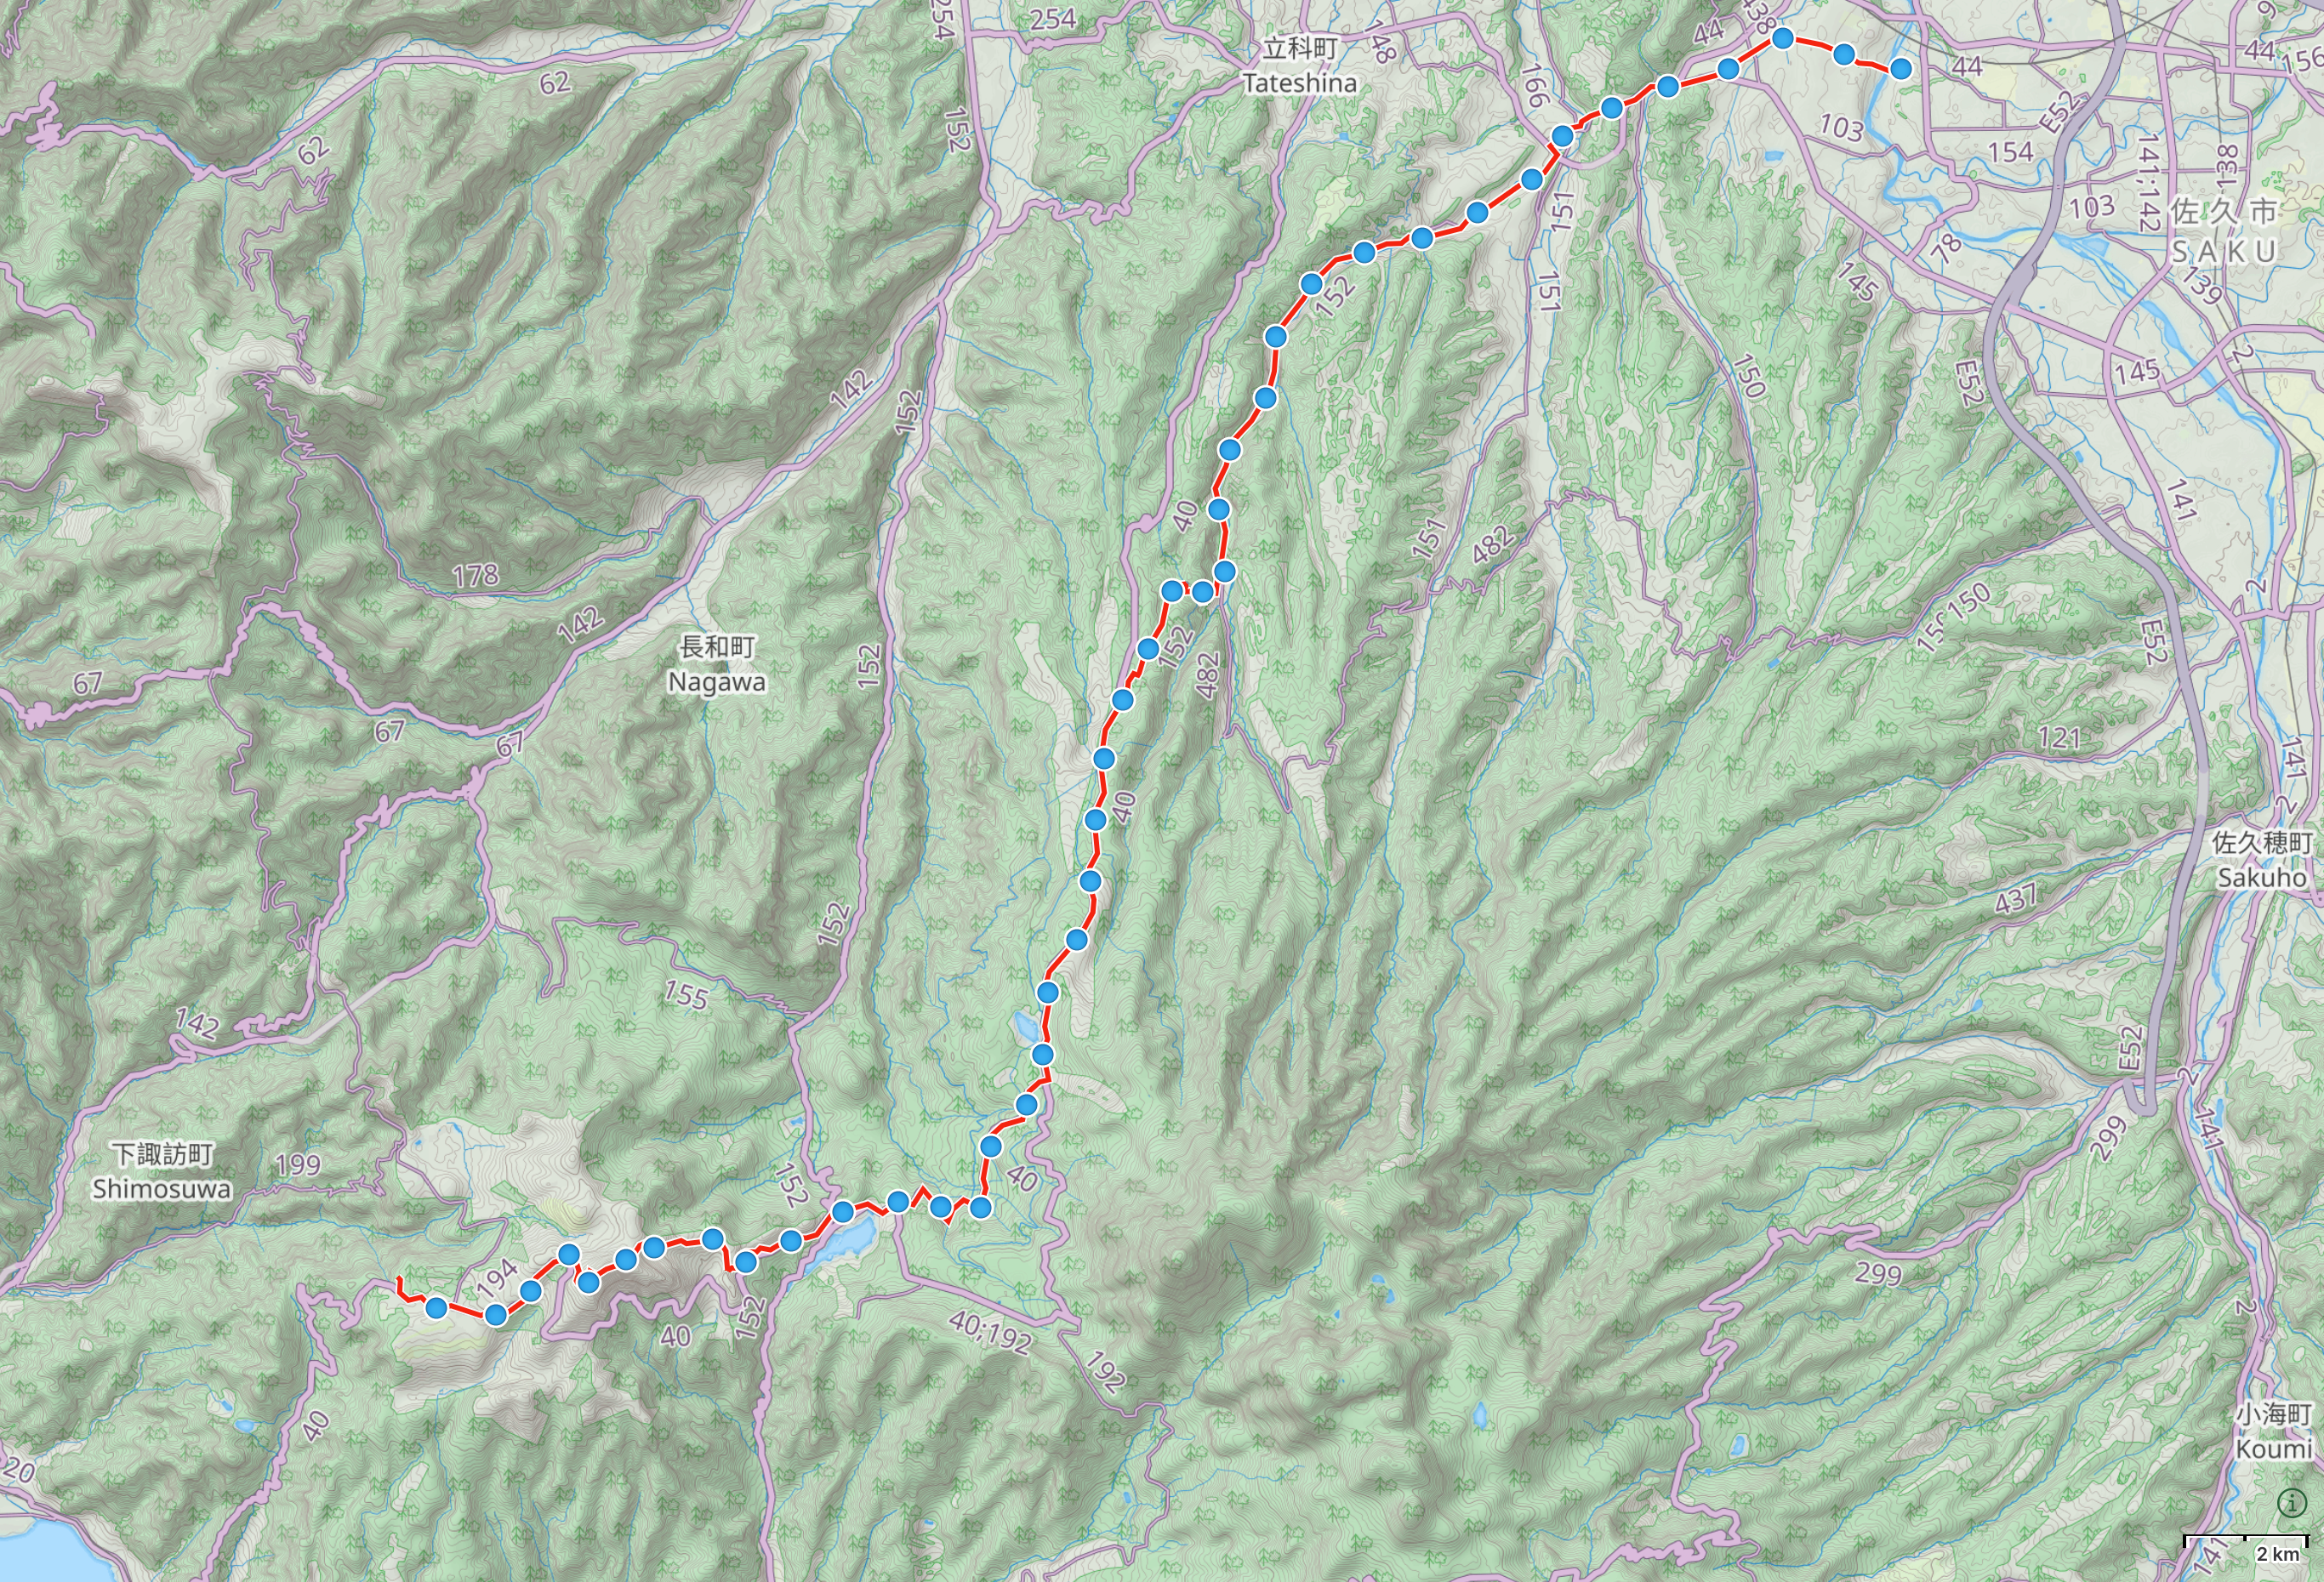 Map of Nagano with author’s route from Upper Suwa to Mochizuki highlighted.